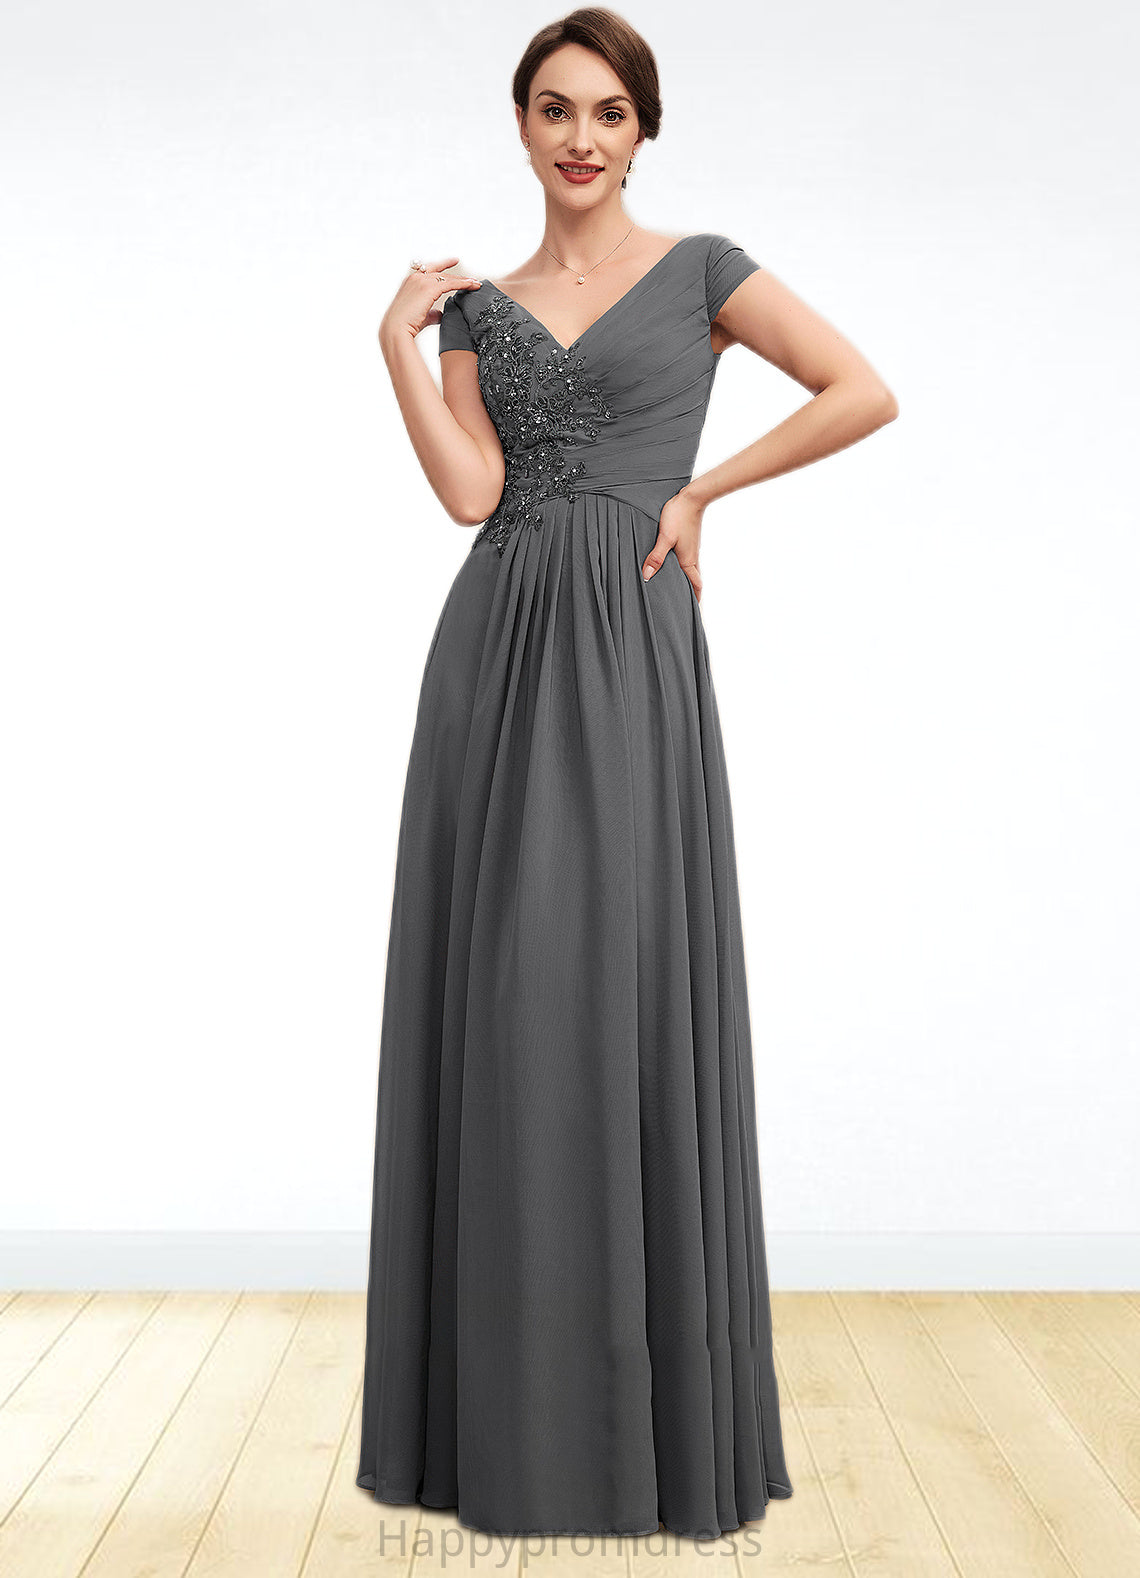 Thalia A-Line V-neck Floor-Length Chiffon Mother of the Bride Dress With Ruffle Lace Beading Sequins XXS126P0014582